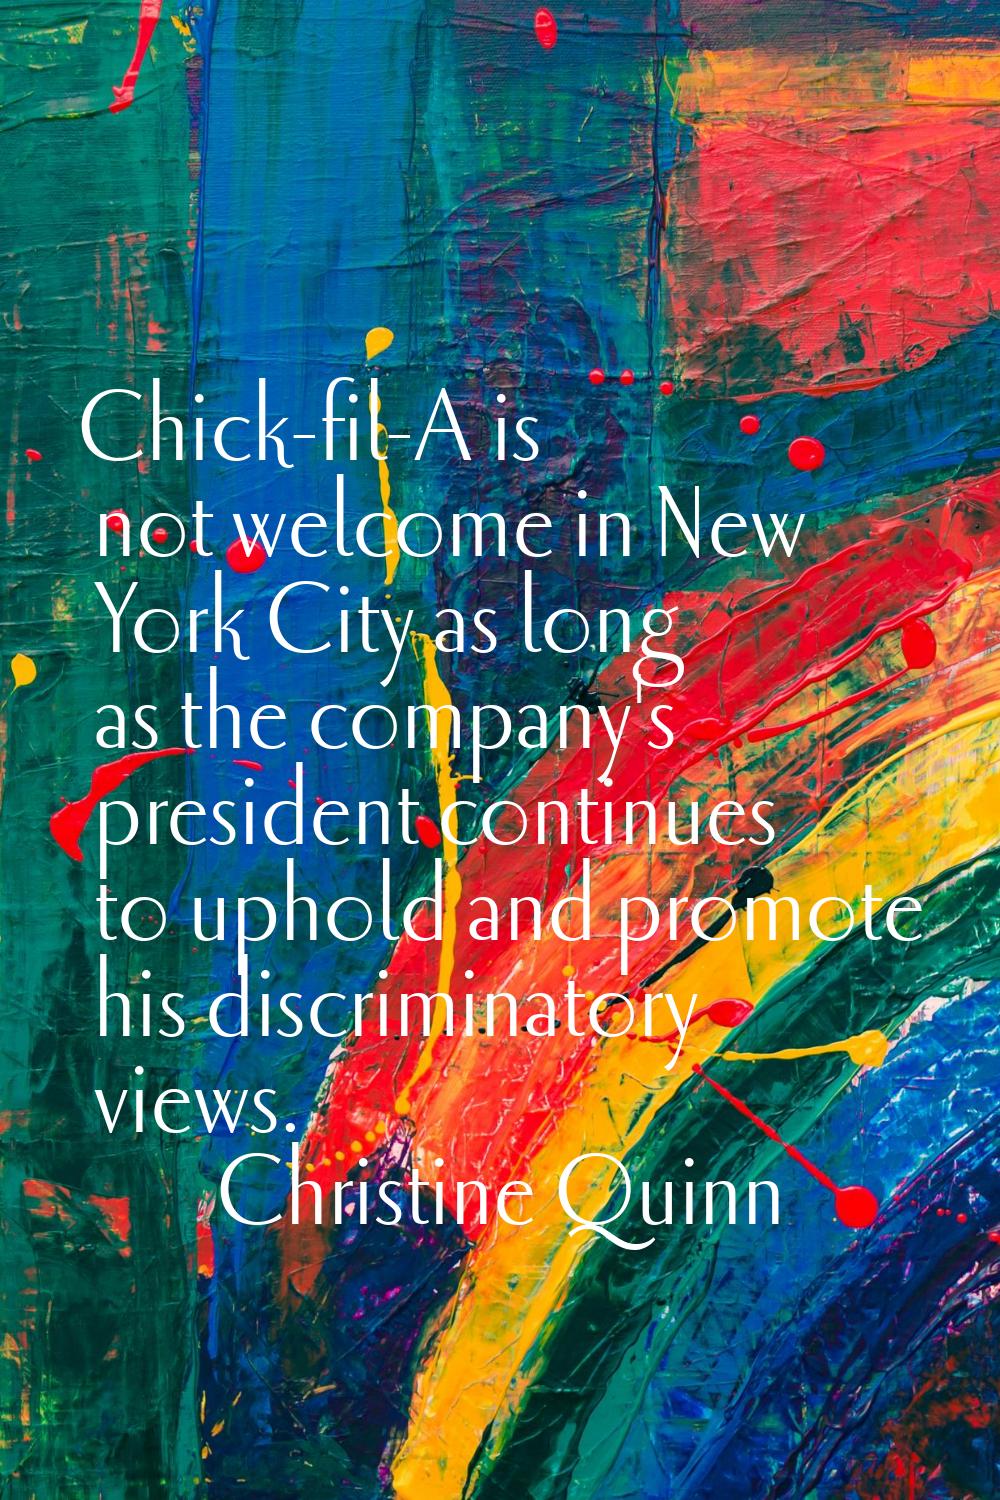 Chick-fil-A is not welcome in New York City as long as the company's president continues to uphold 